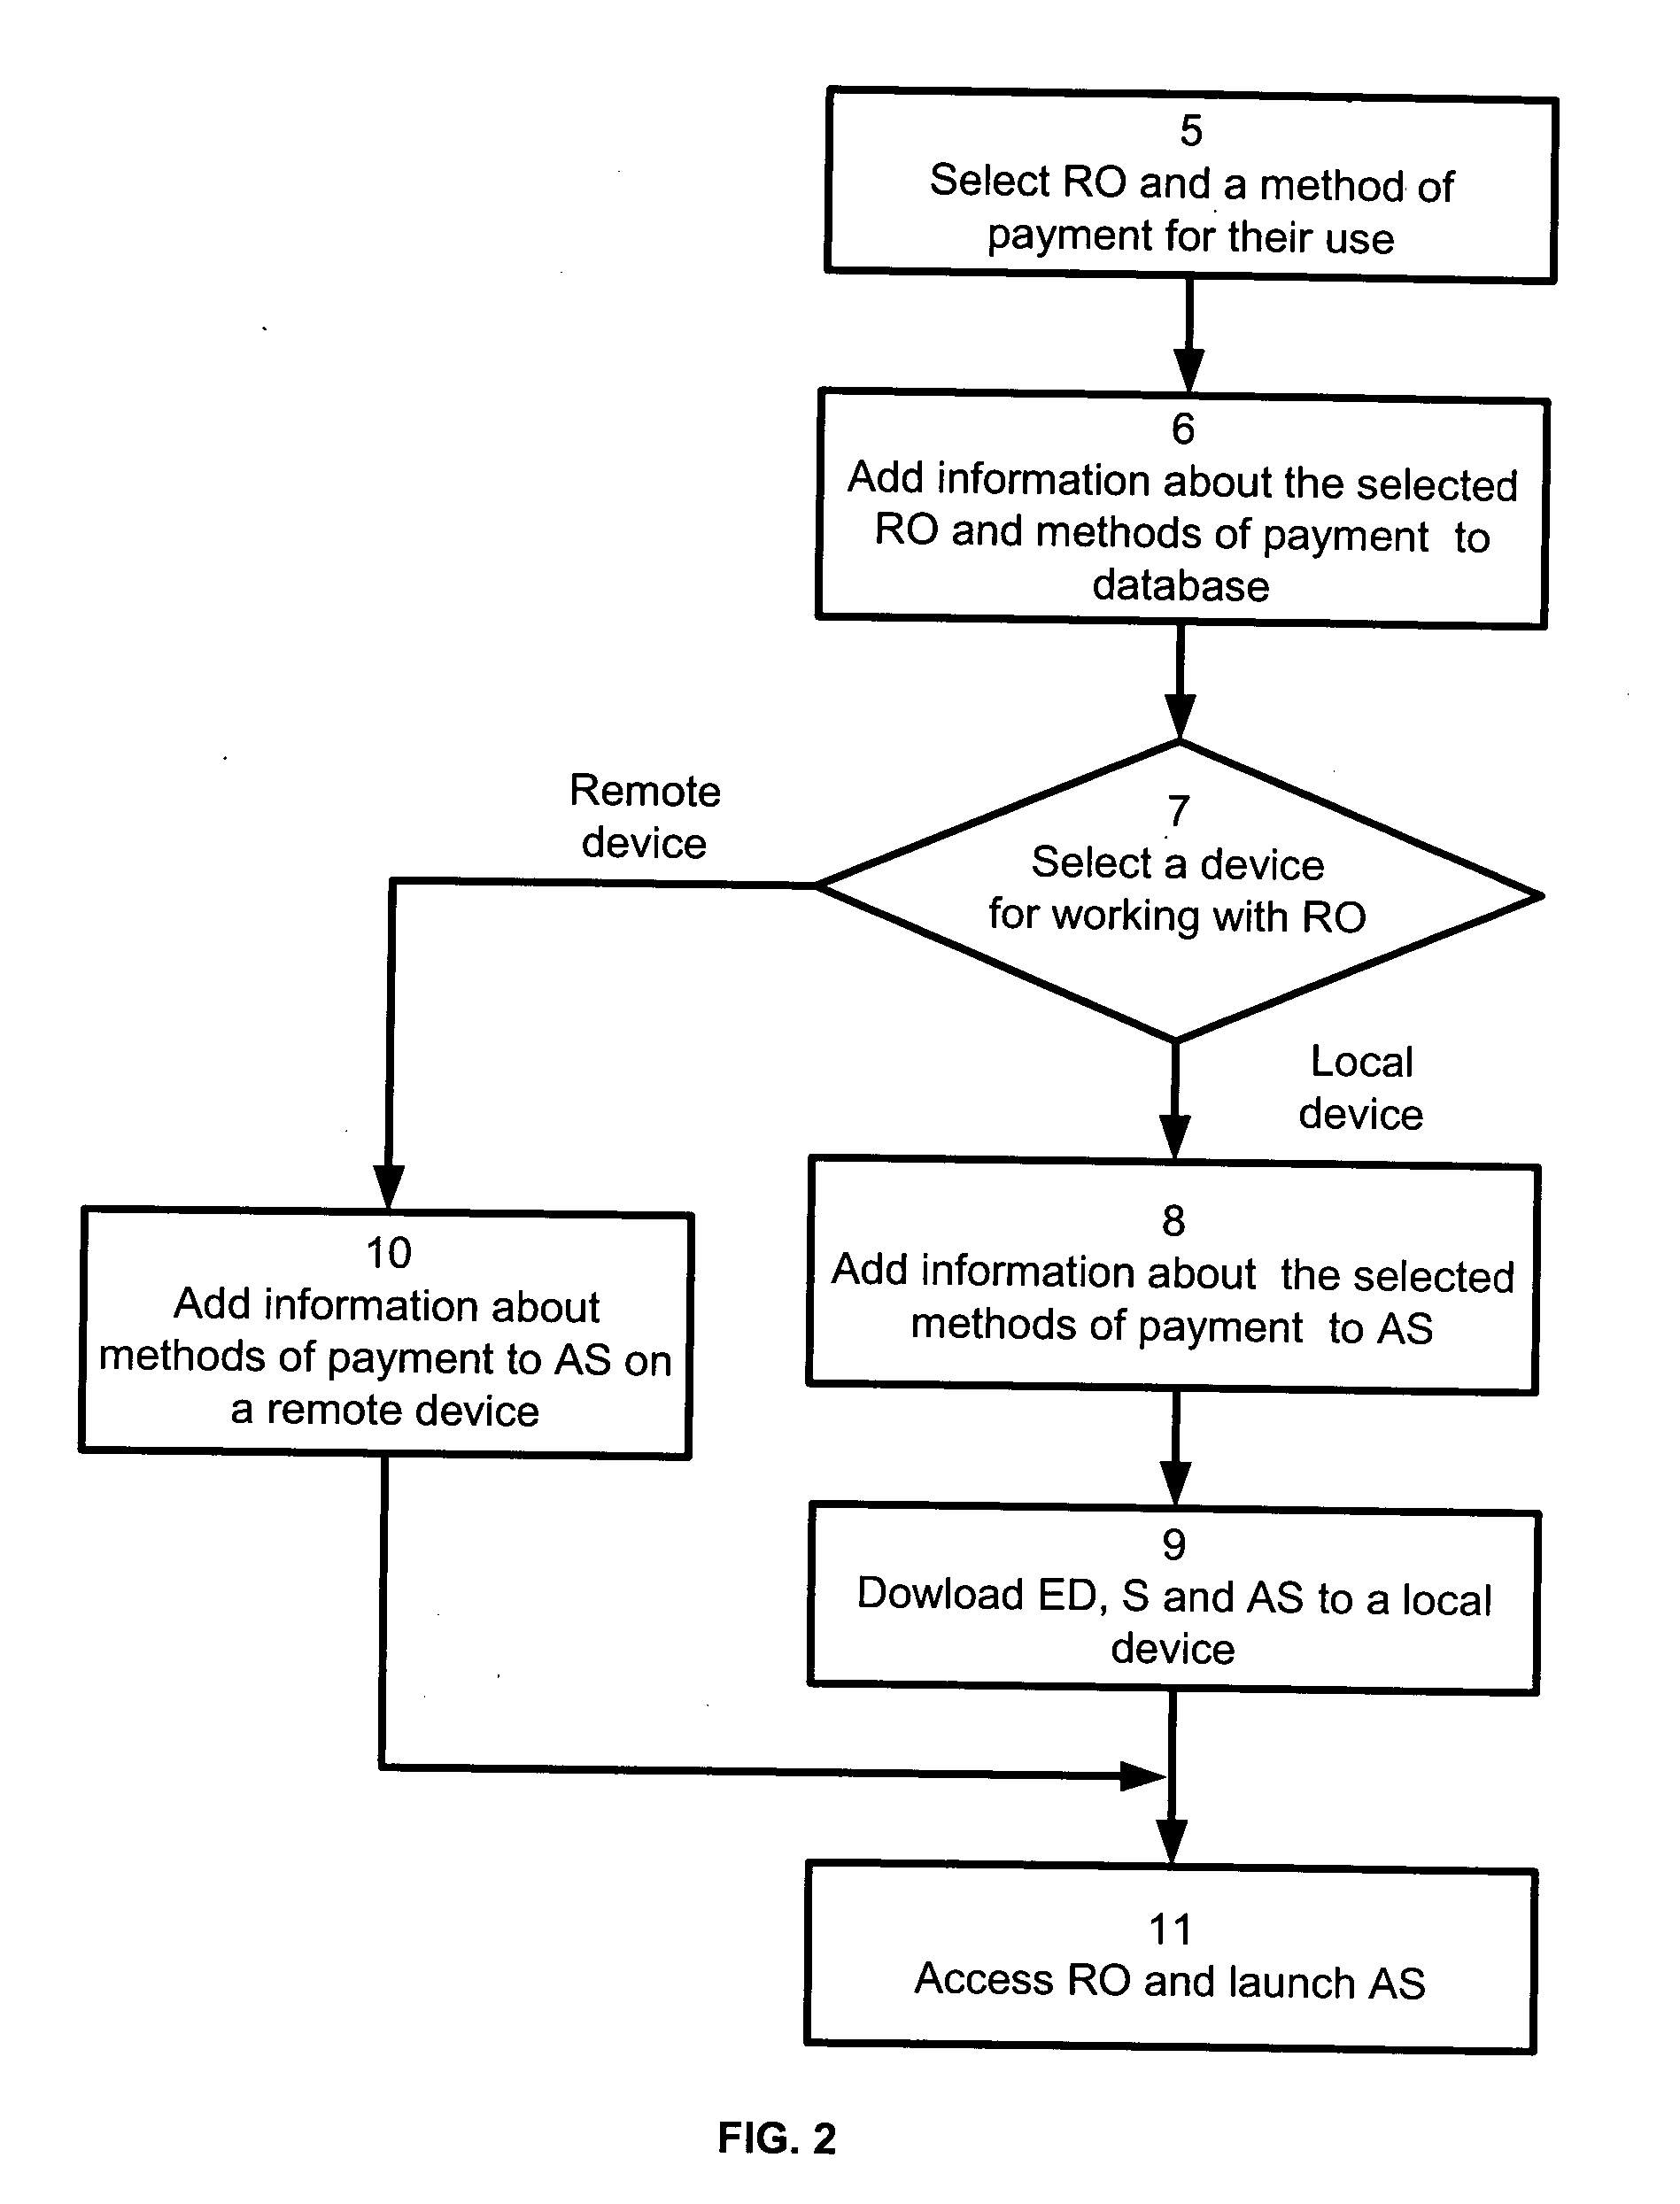 Apparatus and method for account settlements between owners of software, electronic data, and remote services rented by users for processing information